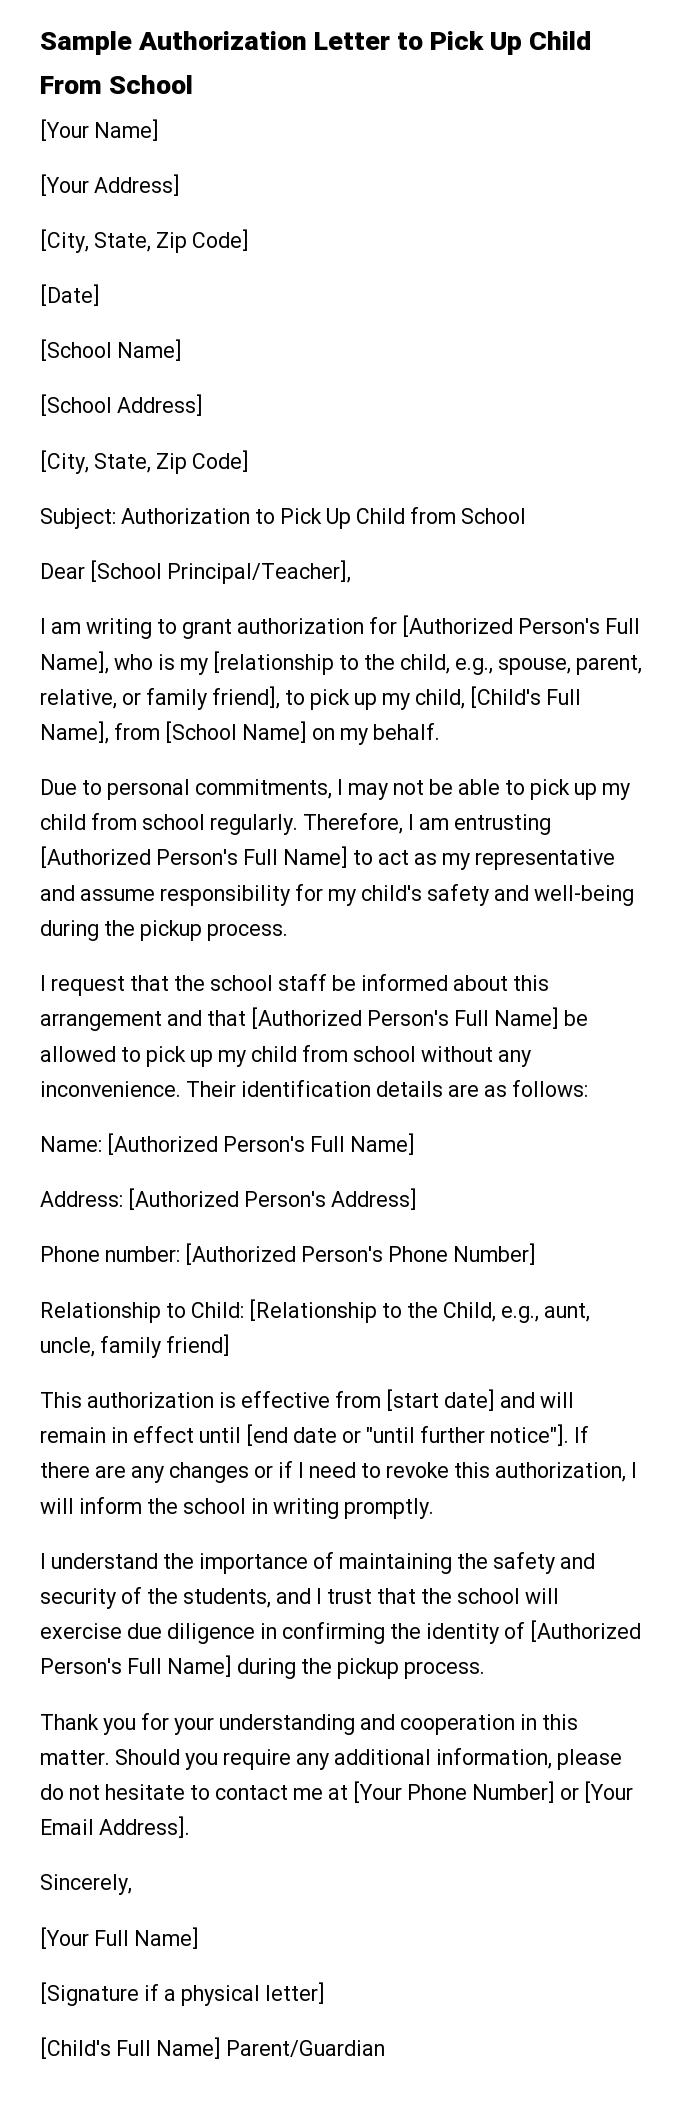 Sample Authorization Letter to Pick Up Child From School